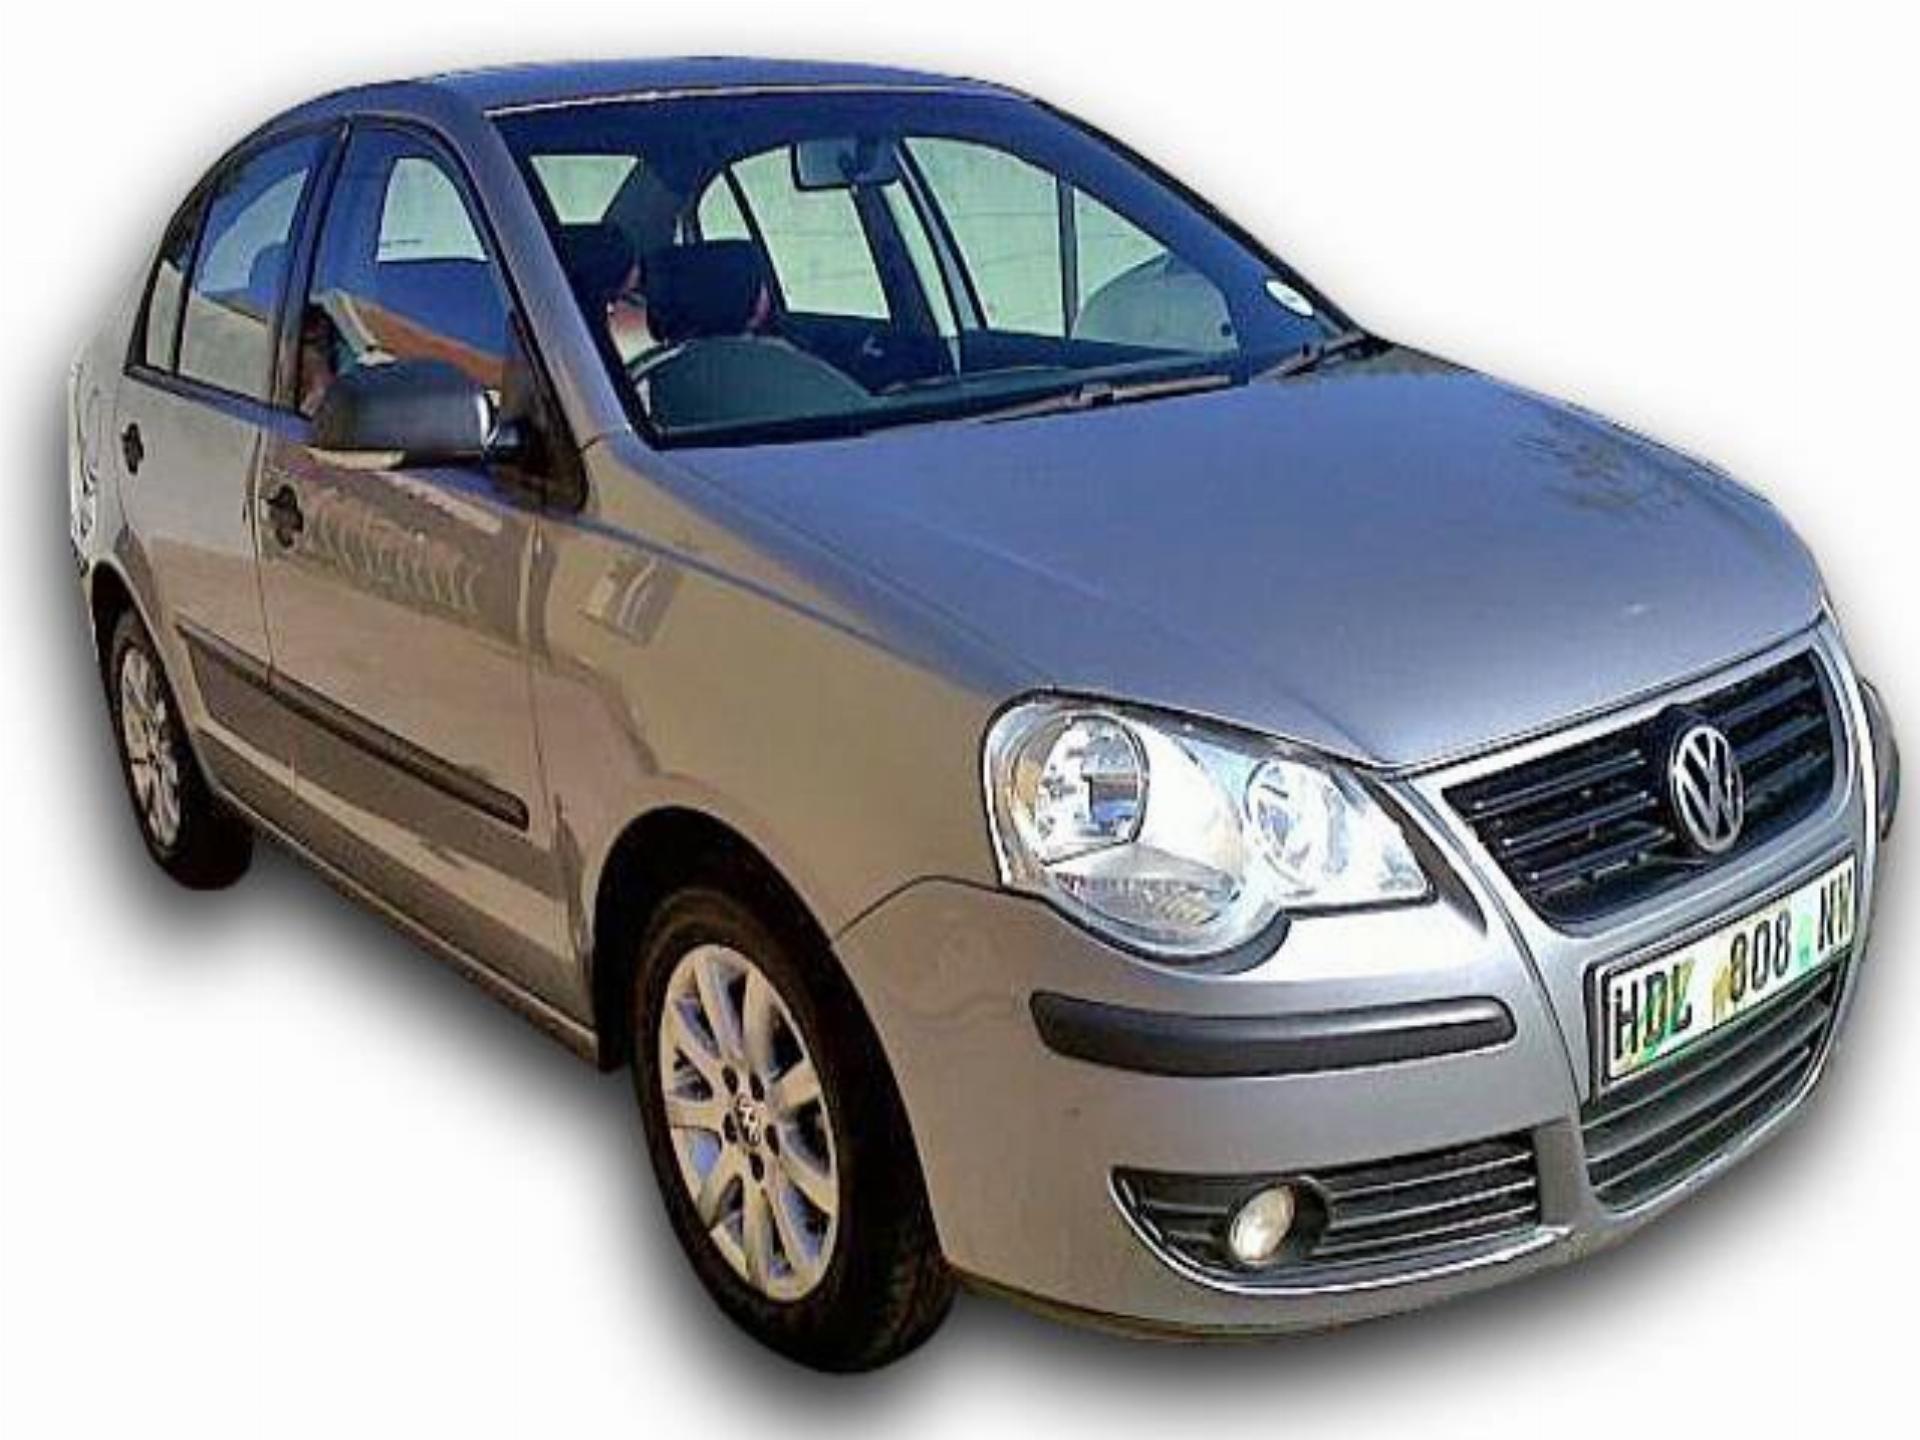 Used Volkswagen Polo Classic Polo 2008 on auction PV1011955